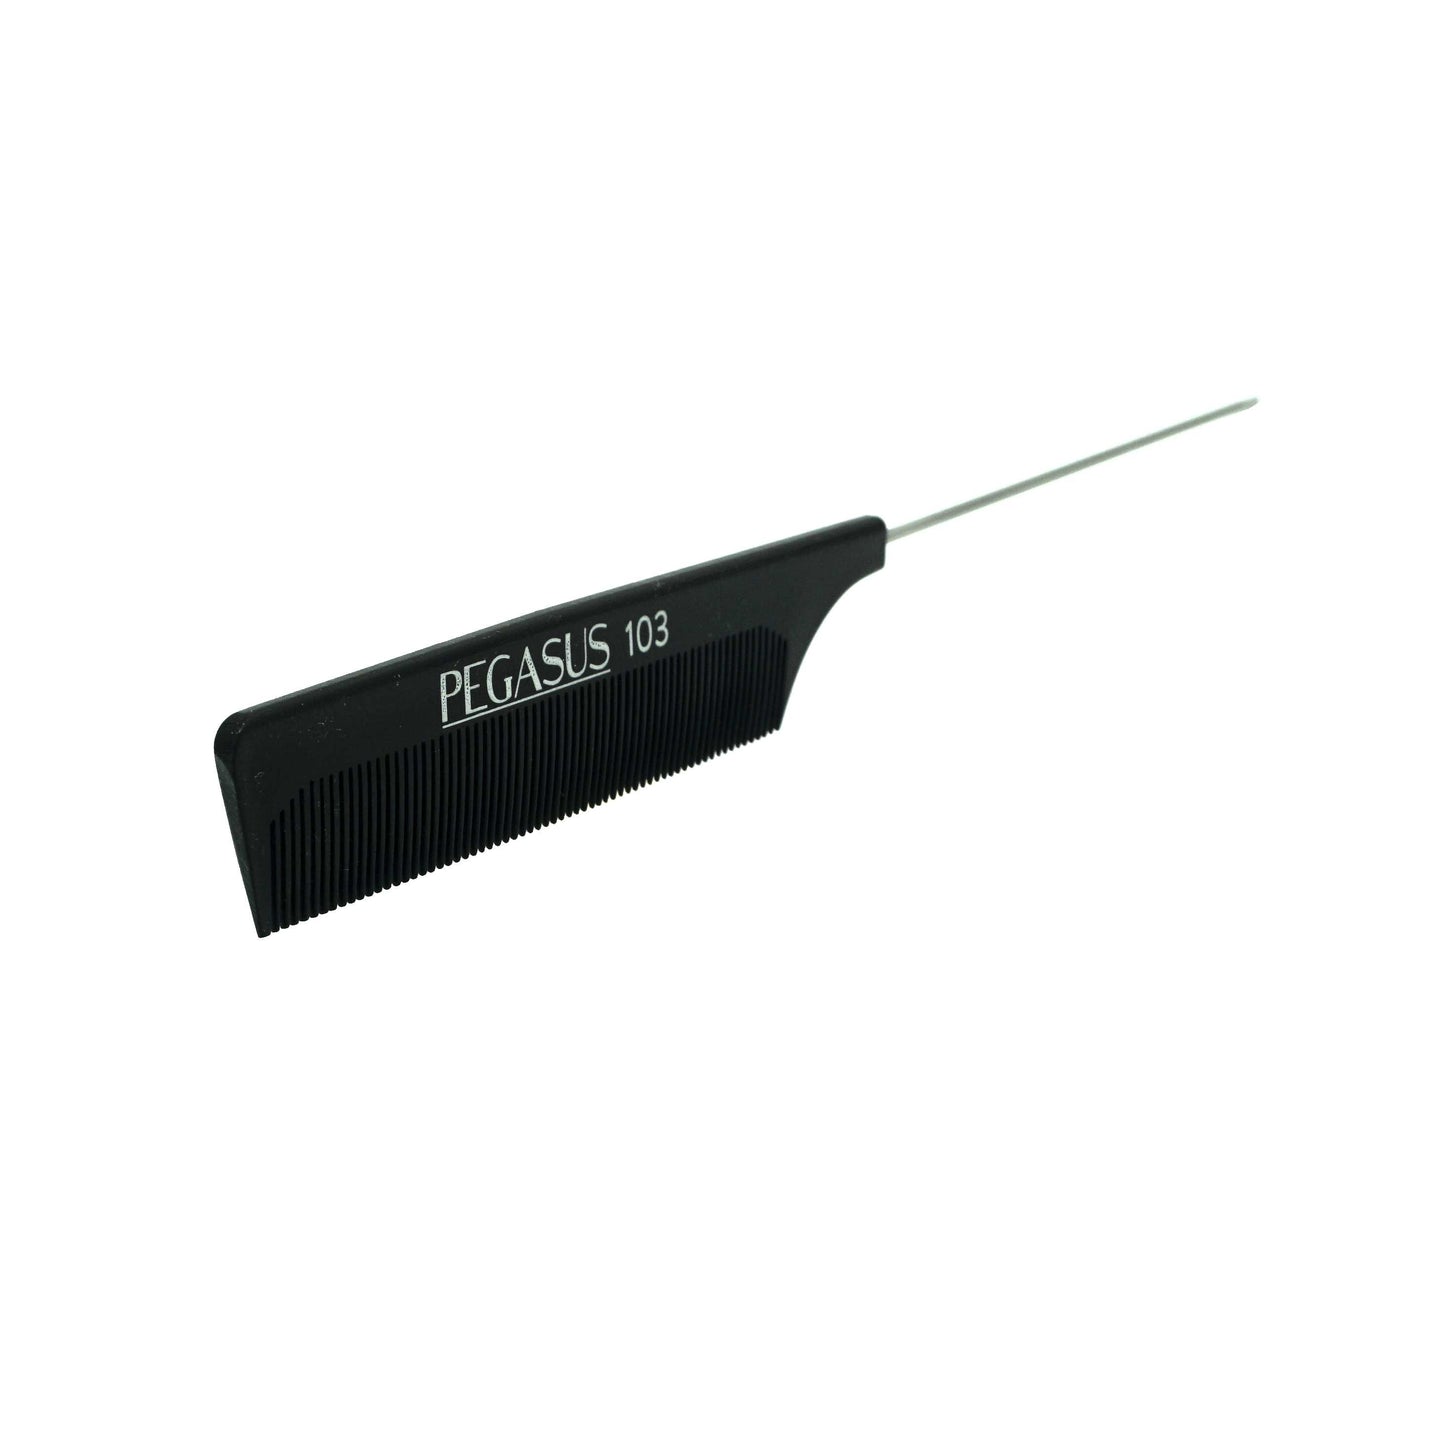 Pegasus 103, 9.5in Hard Rubber Fine Tooth Pintail Comb, Smooth Edges, Anti Static, Heat and Chemically Resistant, Stainless Steel Pin, Great for Parting, Coloring Hair | Peines de goma dura - Black